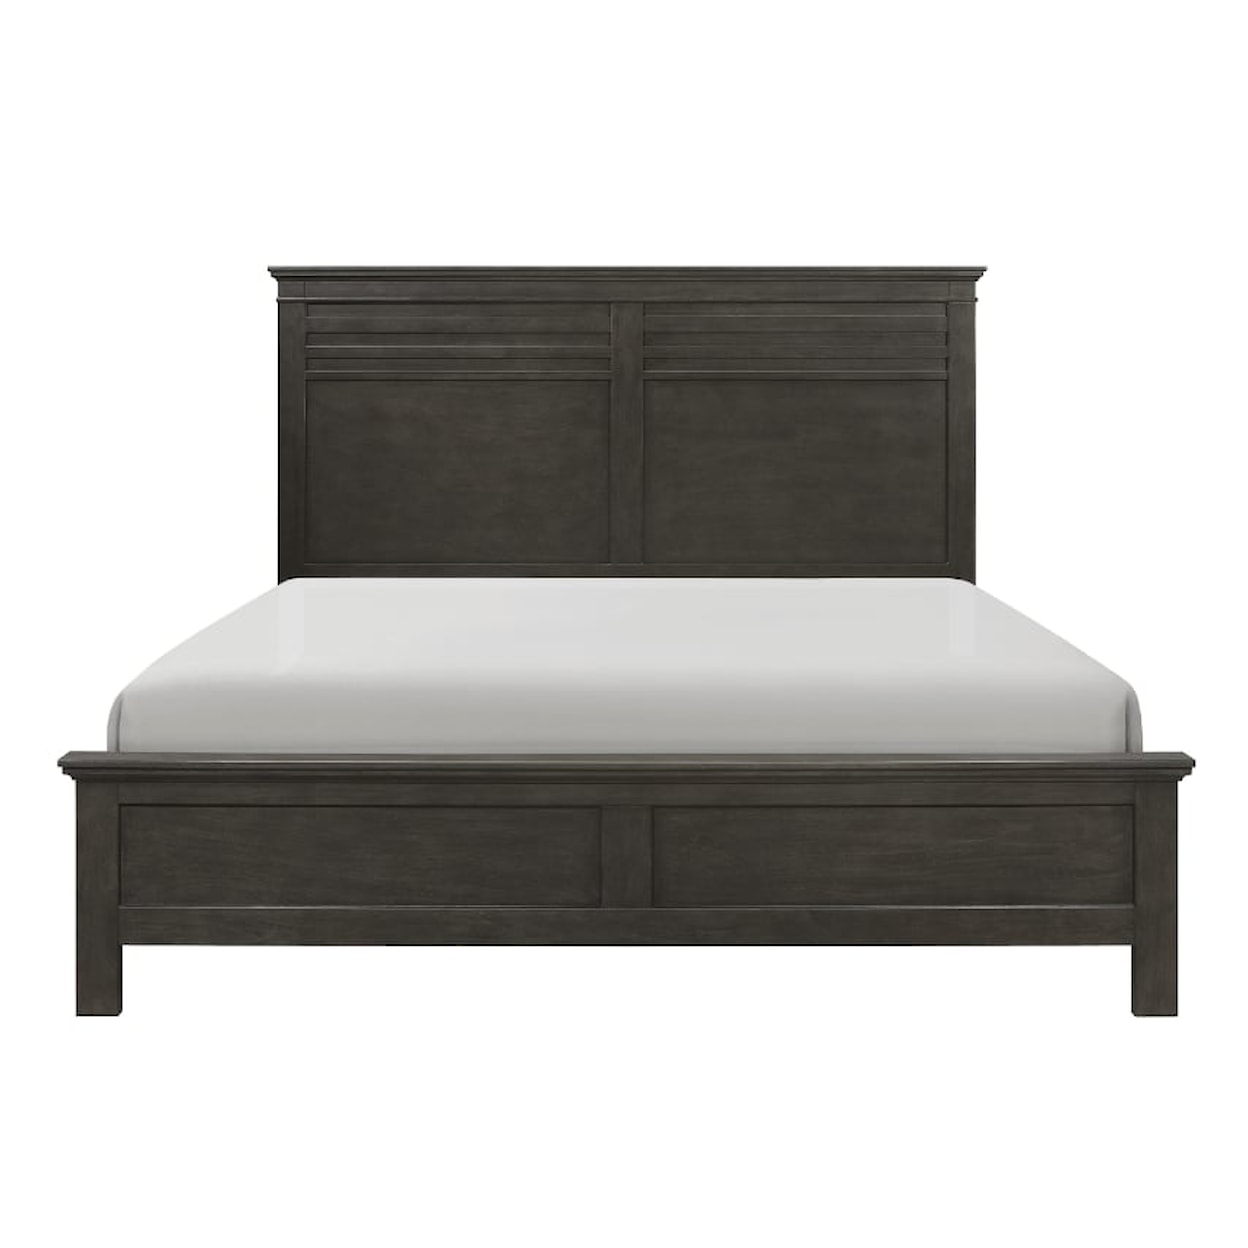 Homelegance Blaire Farm Queen Bed